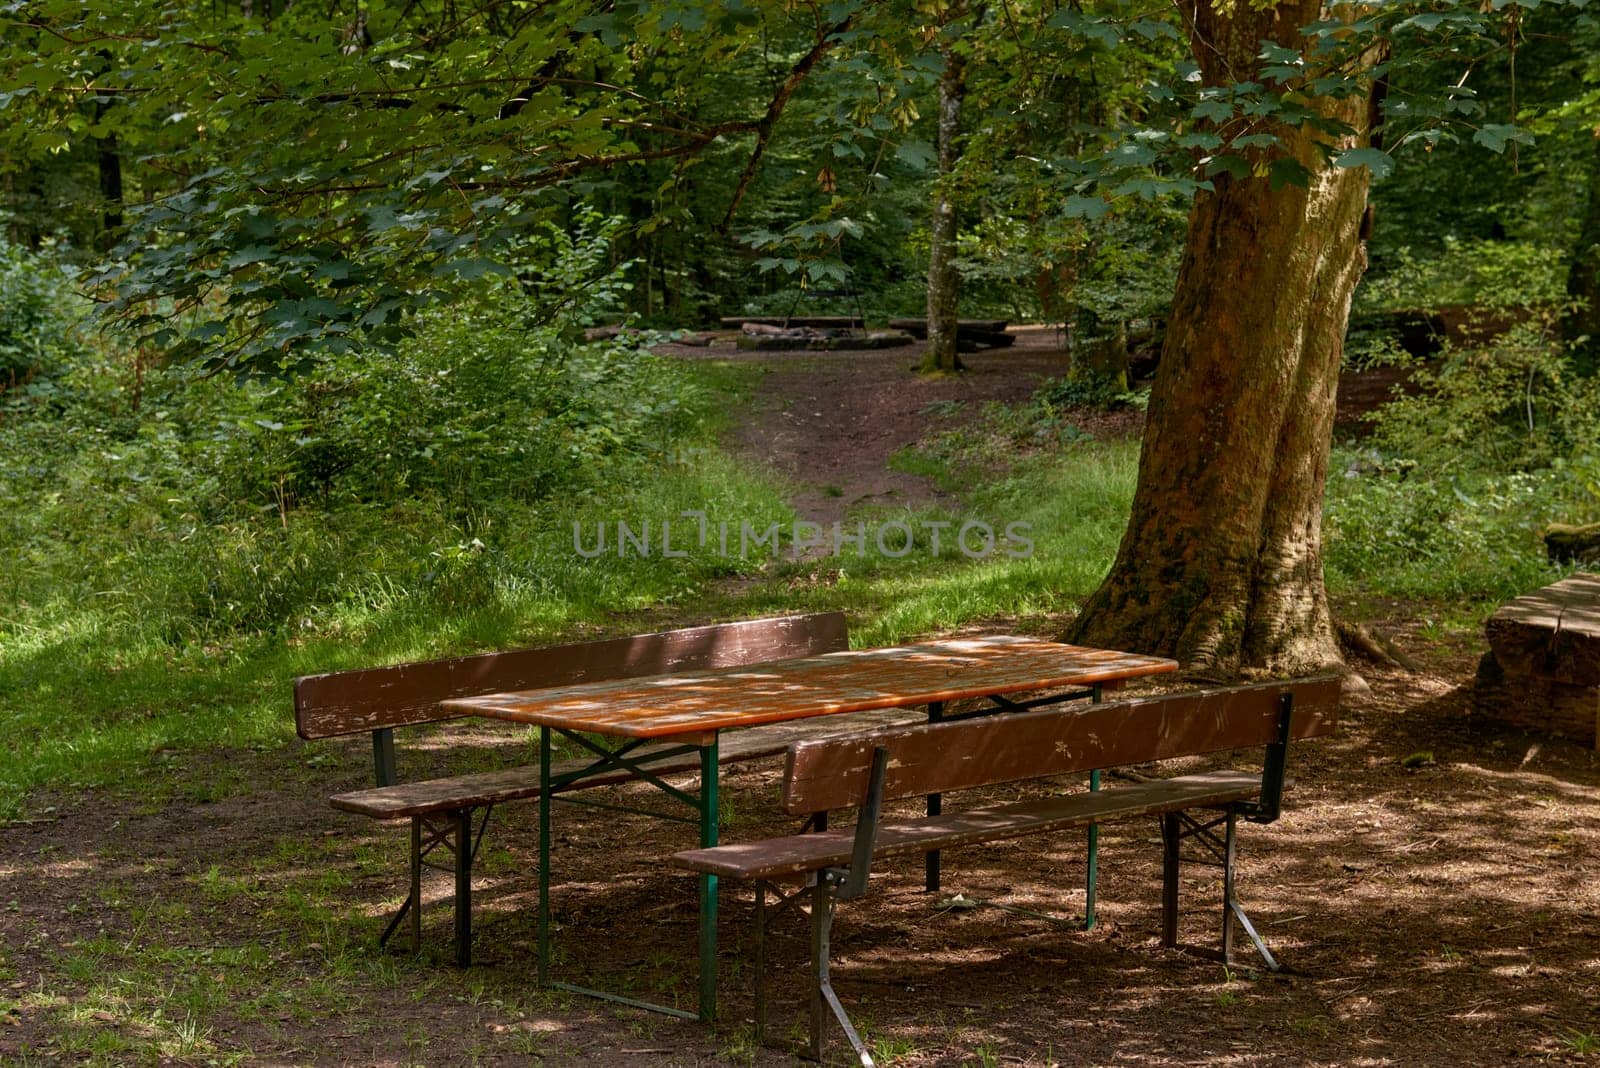 Idyllic Picnic Area At Urach Waterfall Cascade “Uracher Wasserfall“ Under A Maple Tree (Acer) With Green Foliage In Summer Season. Beer Tent Set Covered With Fallen Leaves In Natural Reserve Forest by Andrii_Ko